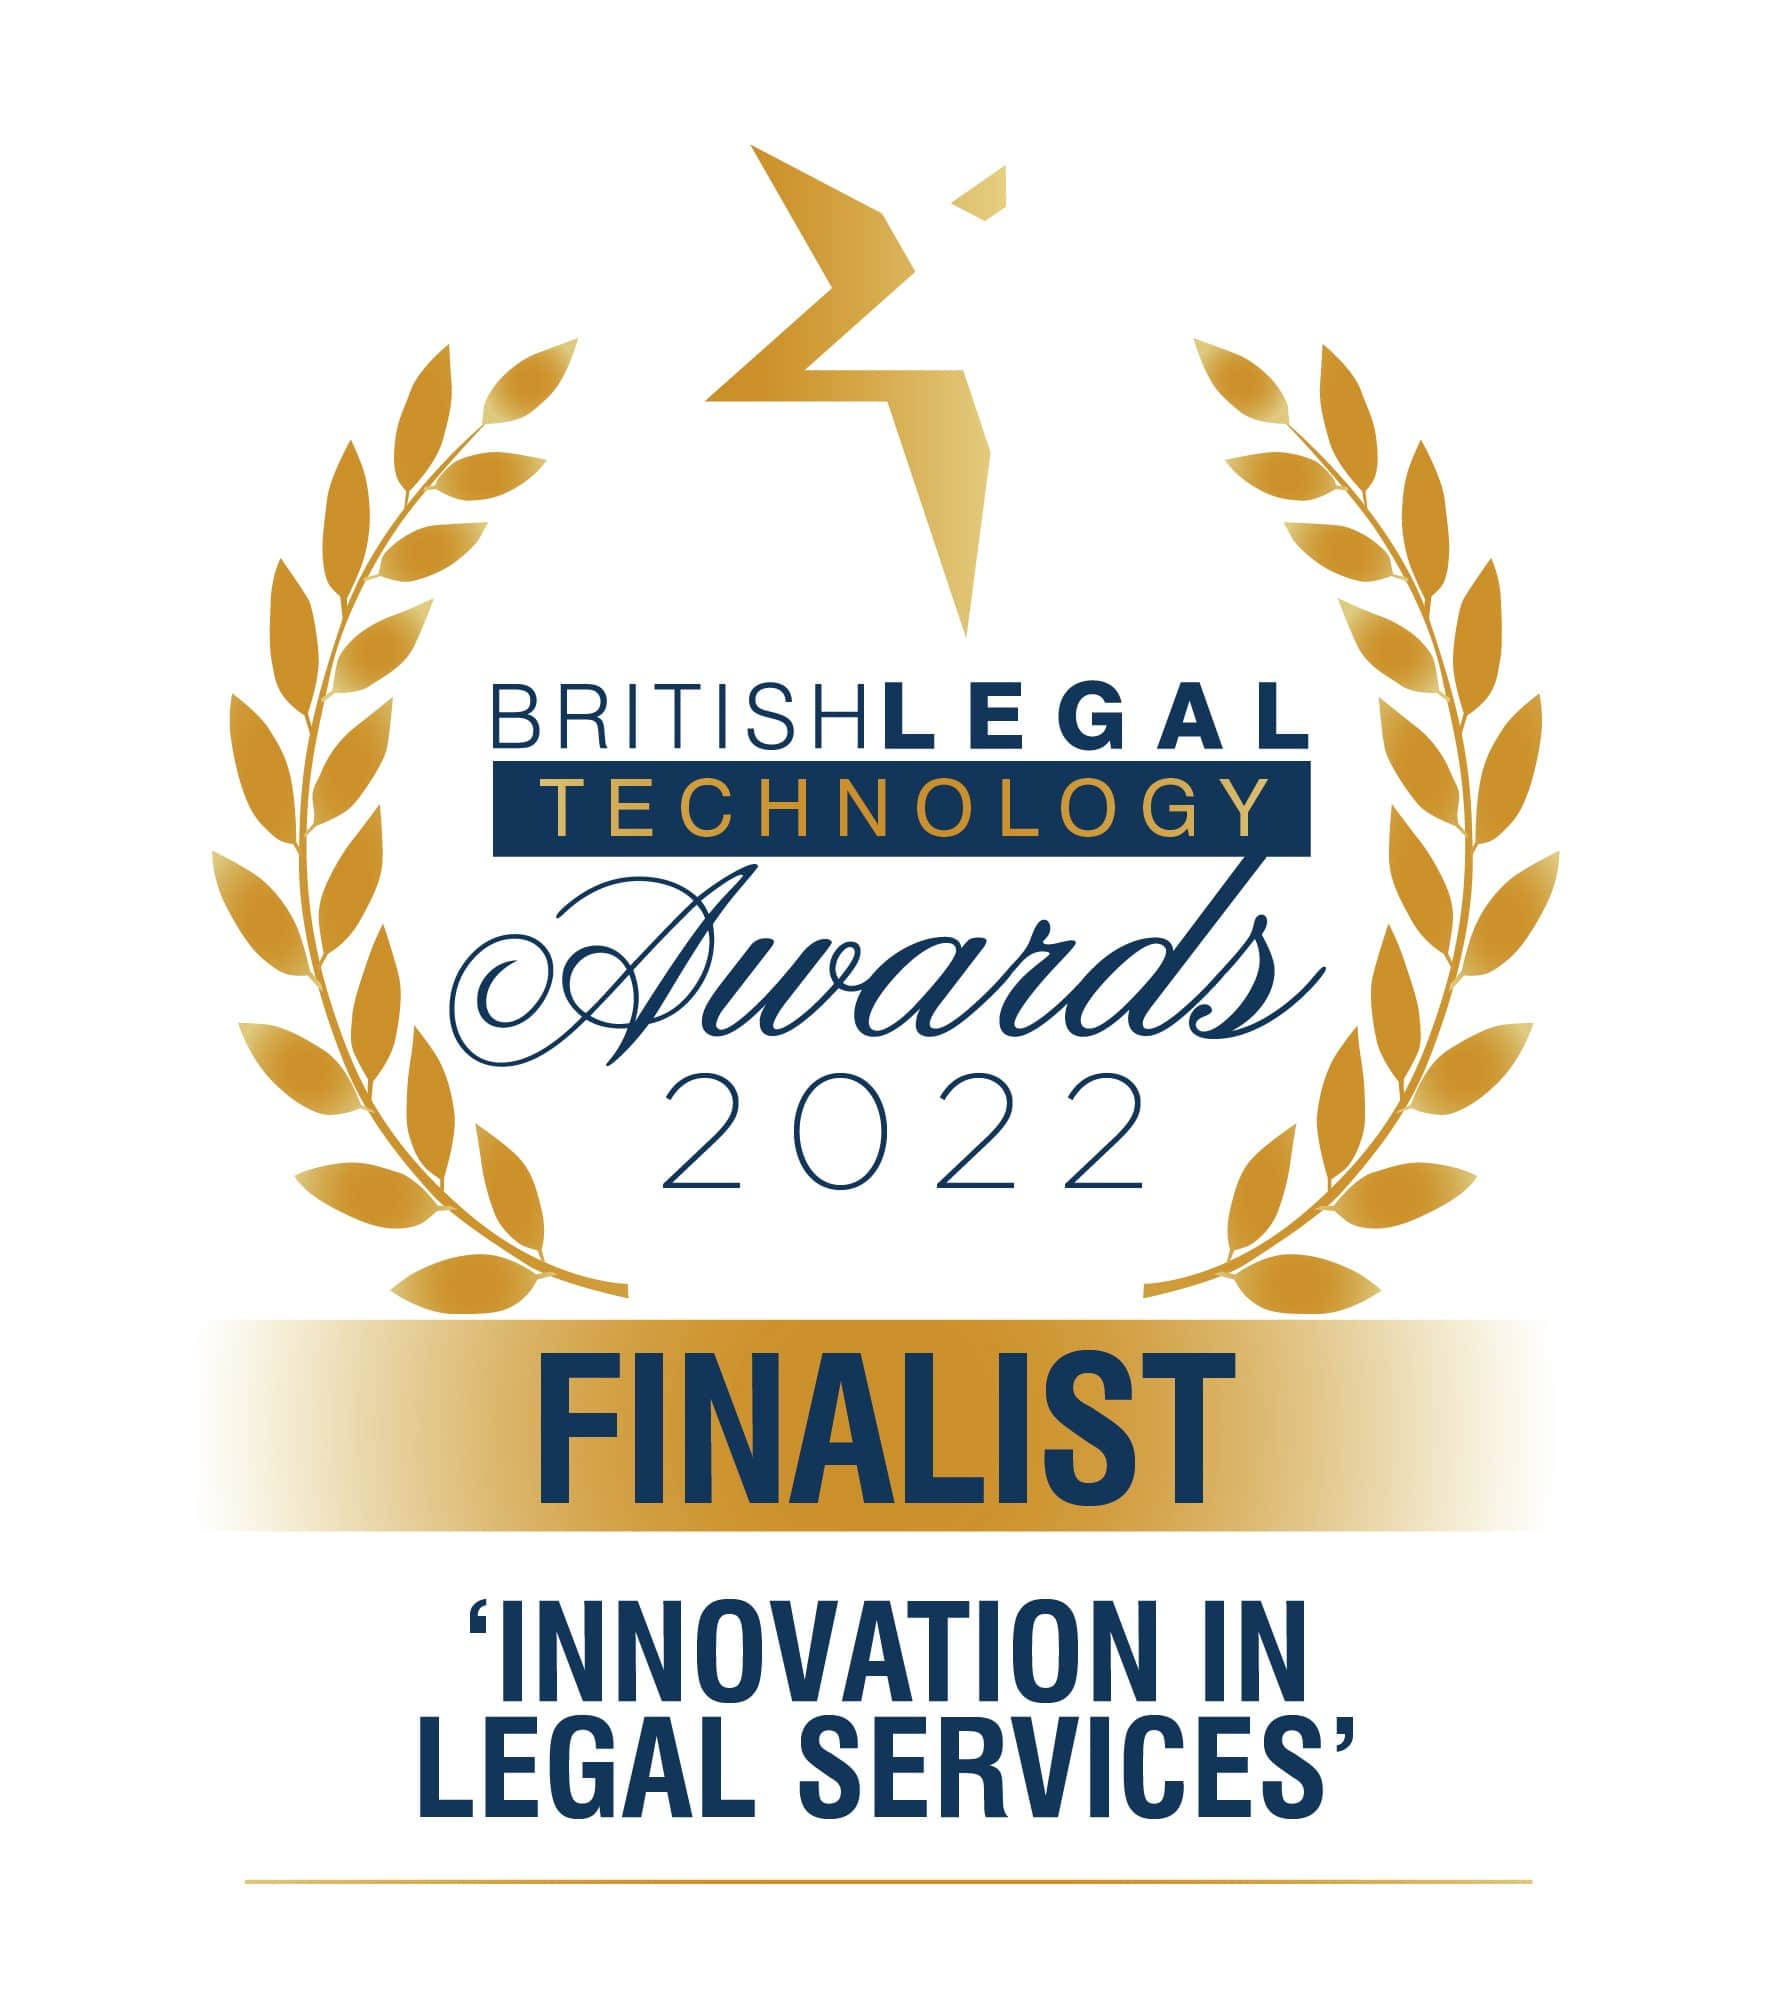 Clarilis is named as a finalist at the British Legal Technology Awards 2022